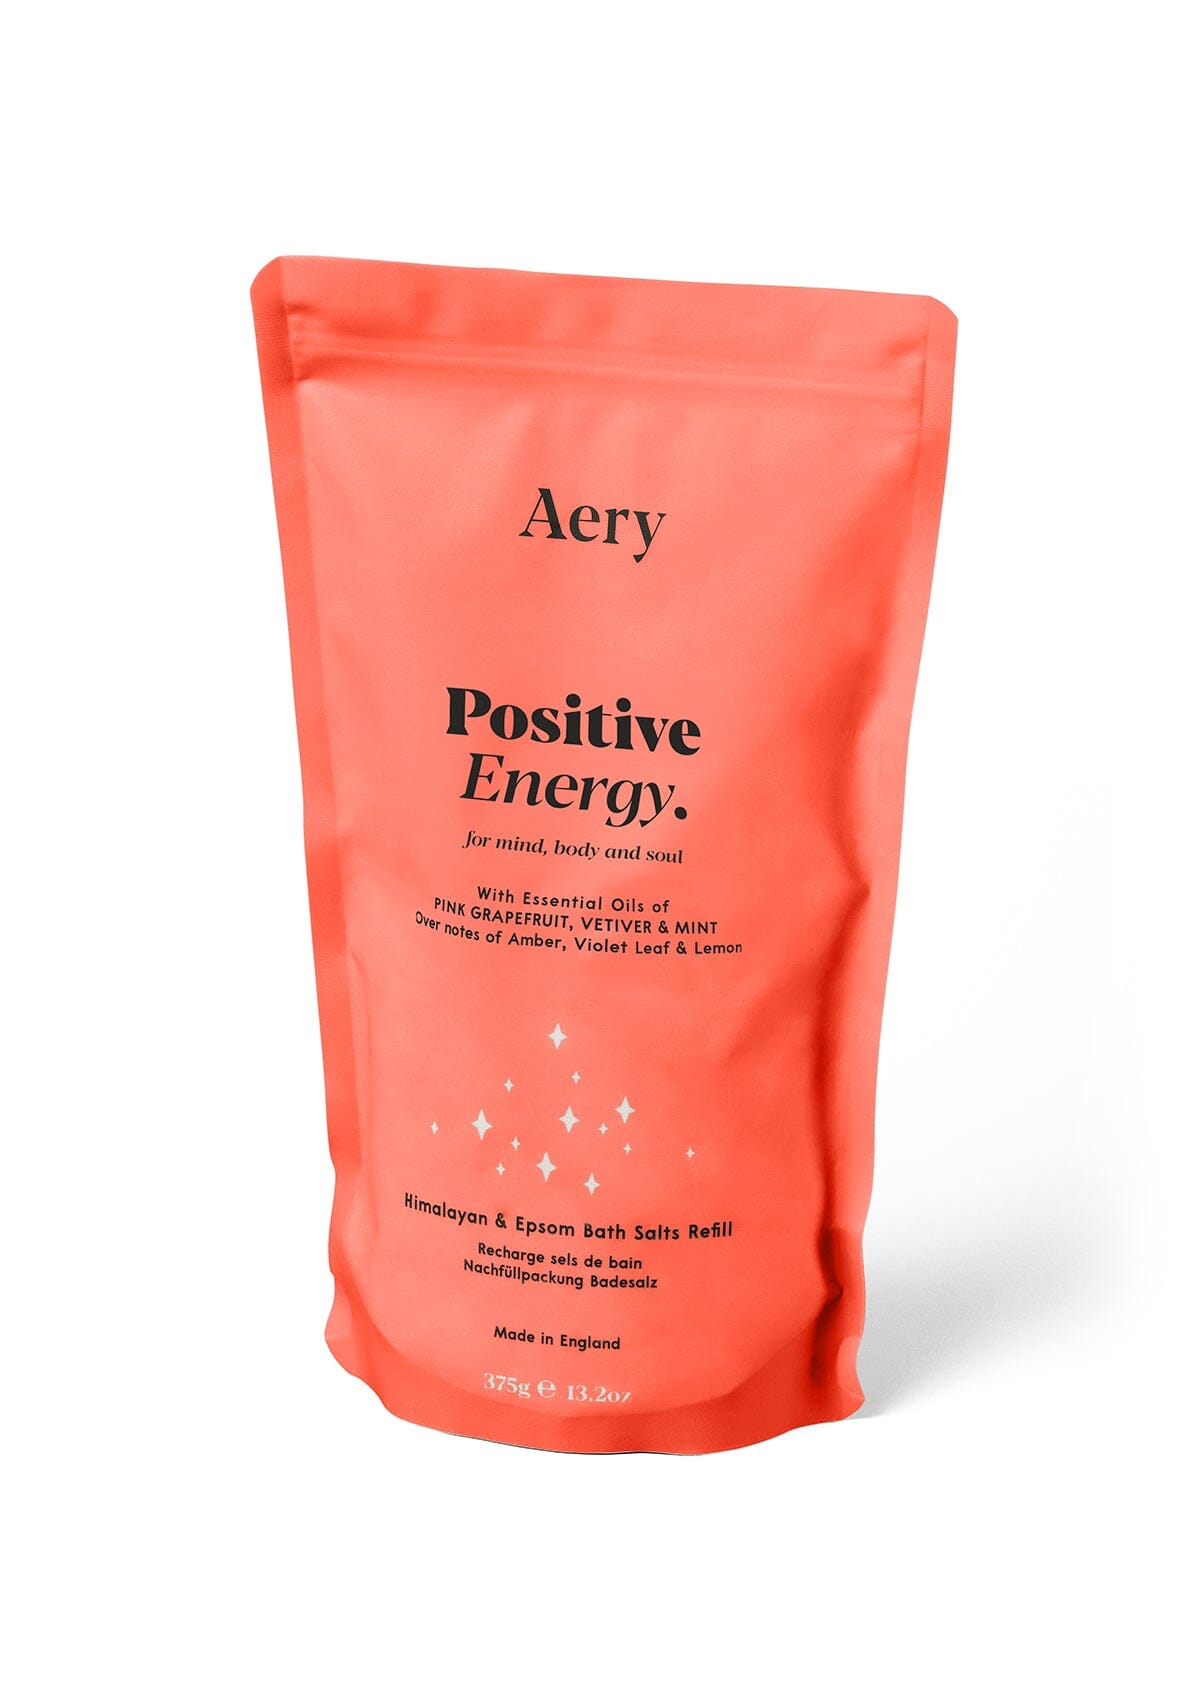 Red Positive Energy bath salts refill pouch by Aery displayed on white background